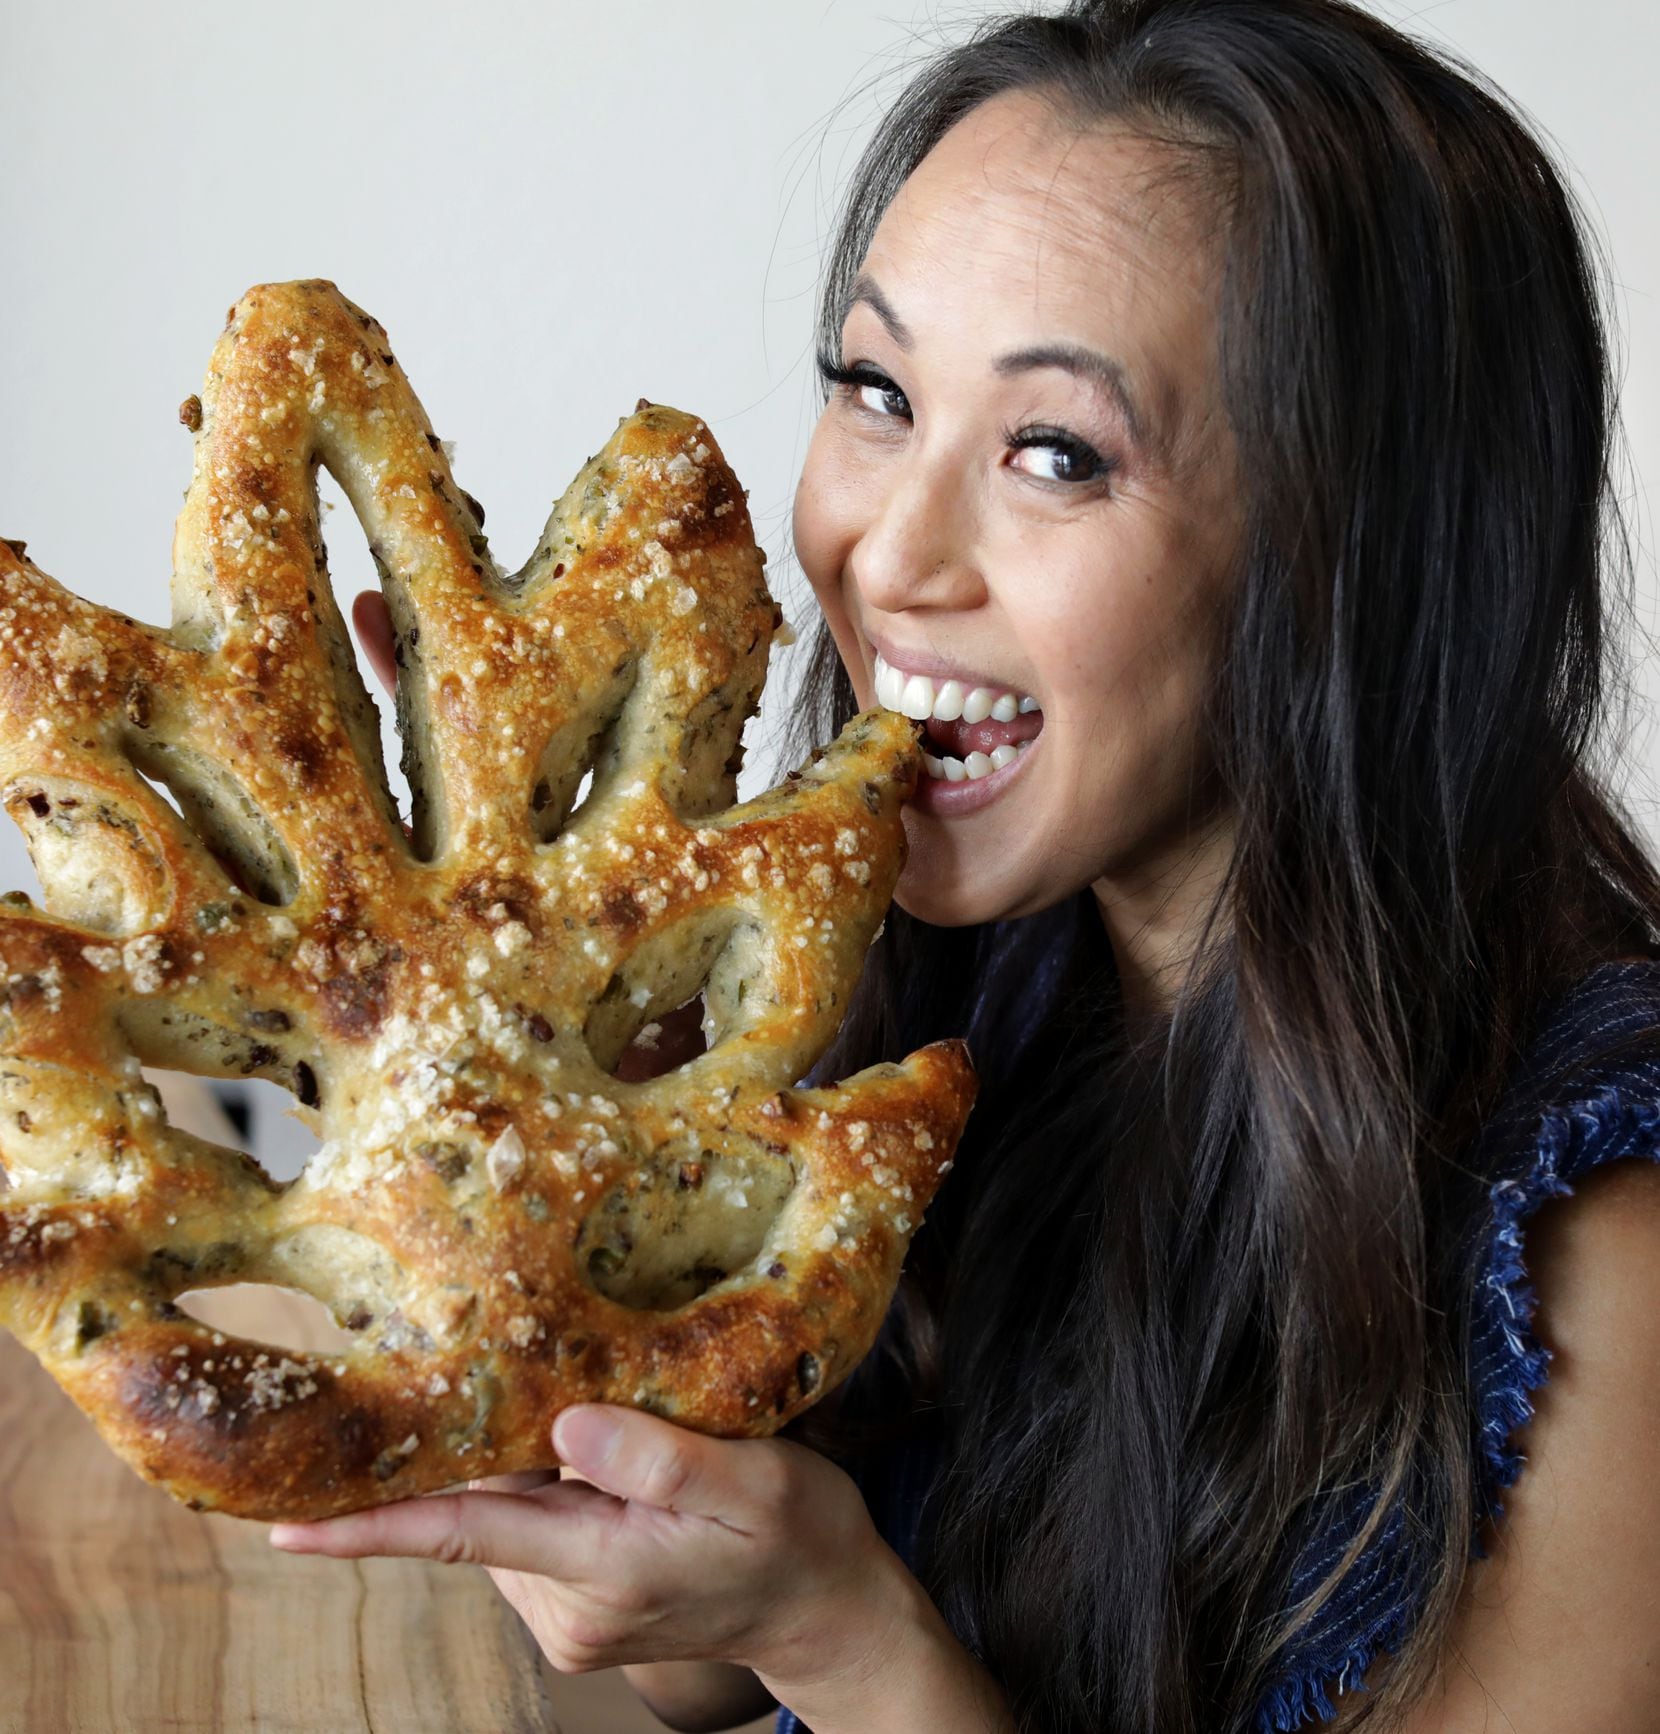 Erika Lam Radtke, owner of Girl With Flour, poses for a photograph at Mudleaf Coffee in Plano.